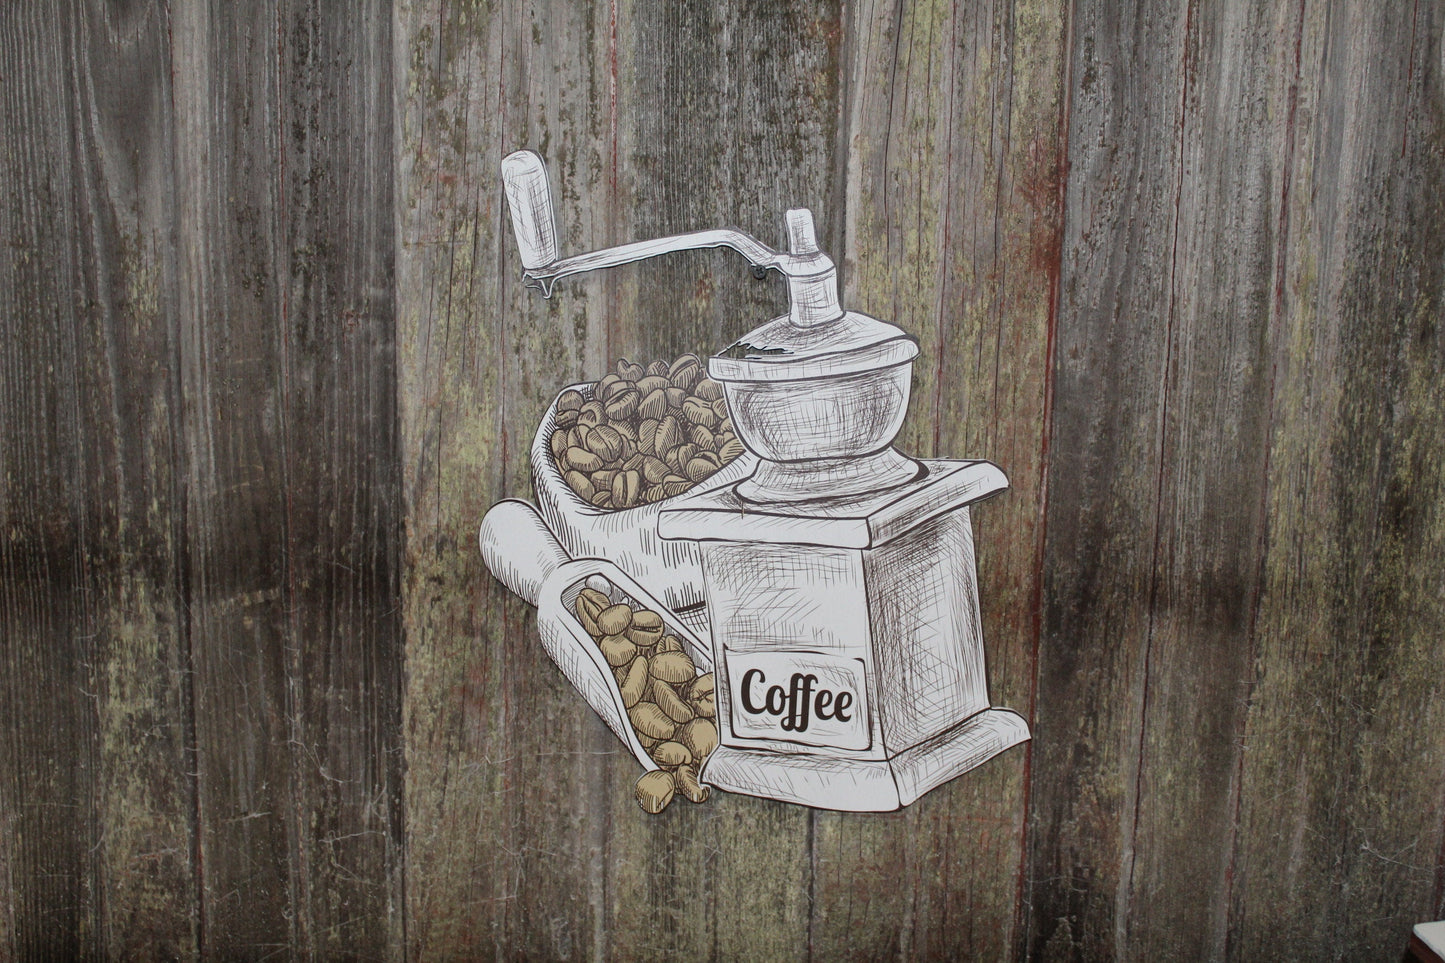 Coffee Grinder Image Uv Printed Rustic Coffee Bean Coffee Shop Espresso Extra Detailed Business Sign Wood  Coffee Shop